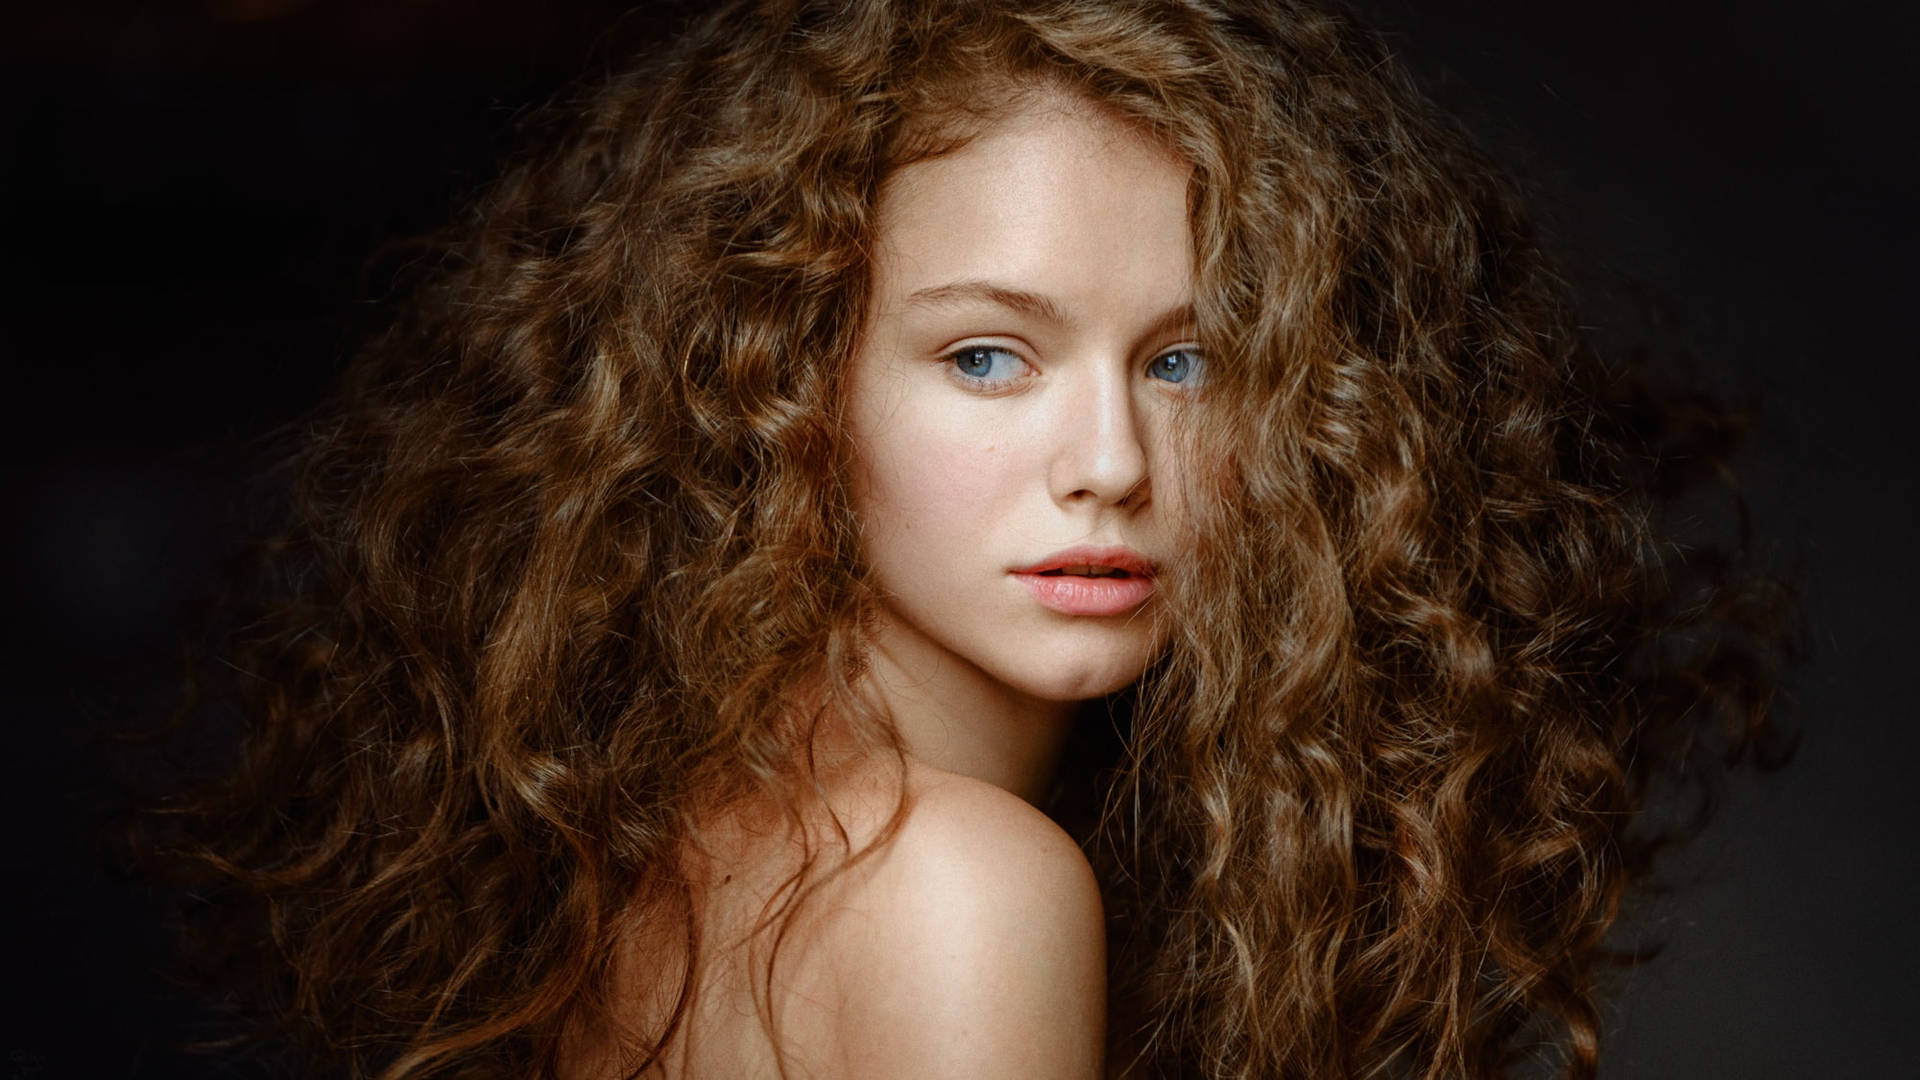 Bare-faced Woman With Curly Hair Wallpaper